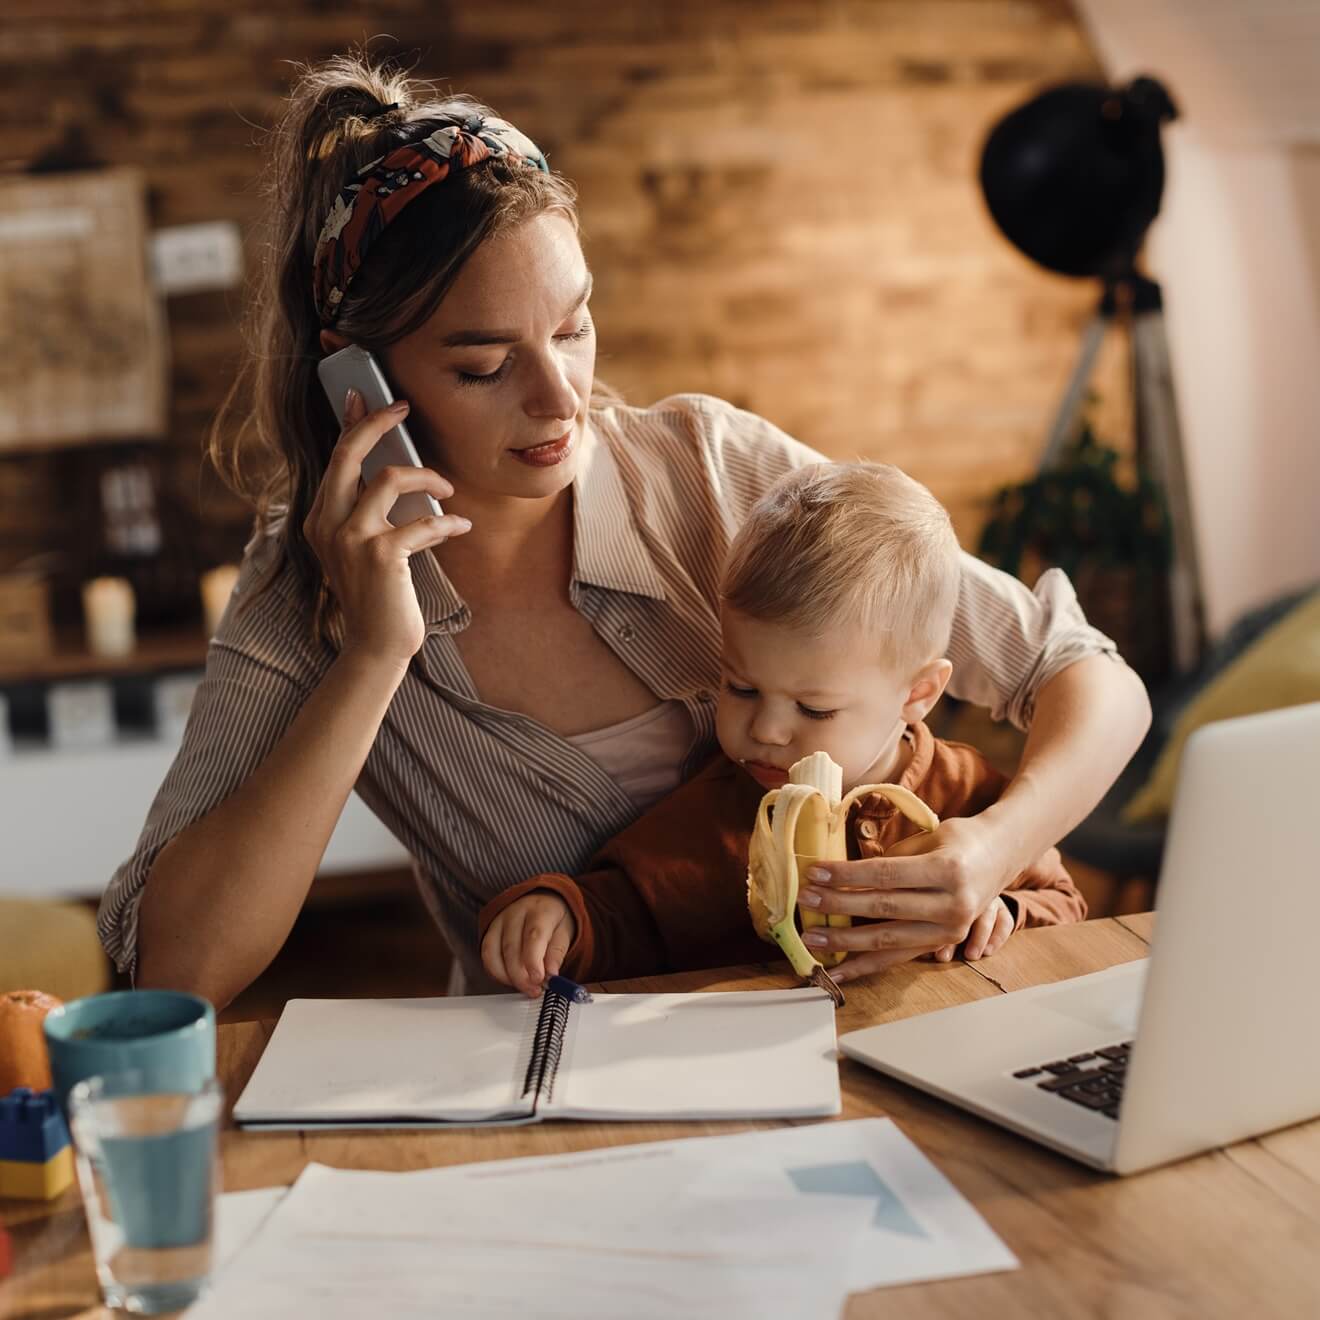 a busy business woman holding a baby and speaking on the phone before a monitor